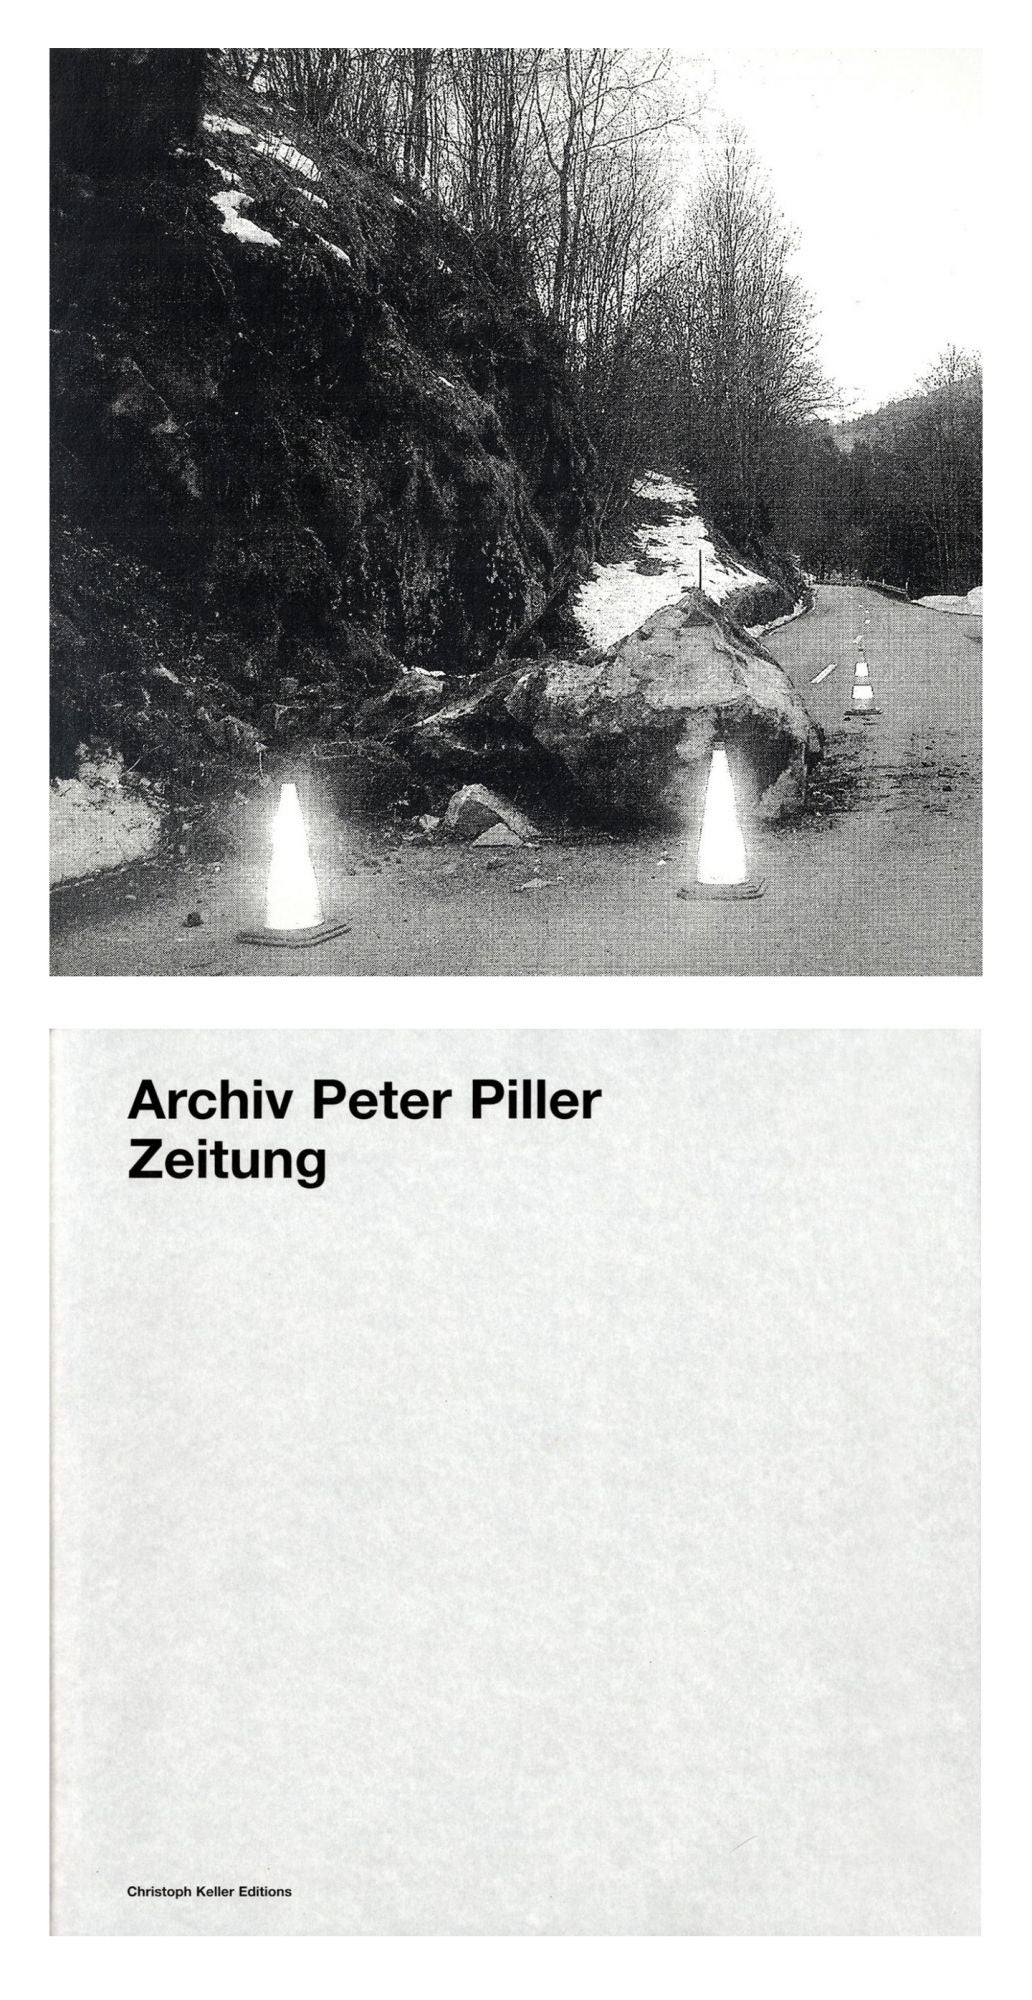 Archiv Peter Piller: Zeitung, Limited Edition (with Archival Pigment Print)